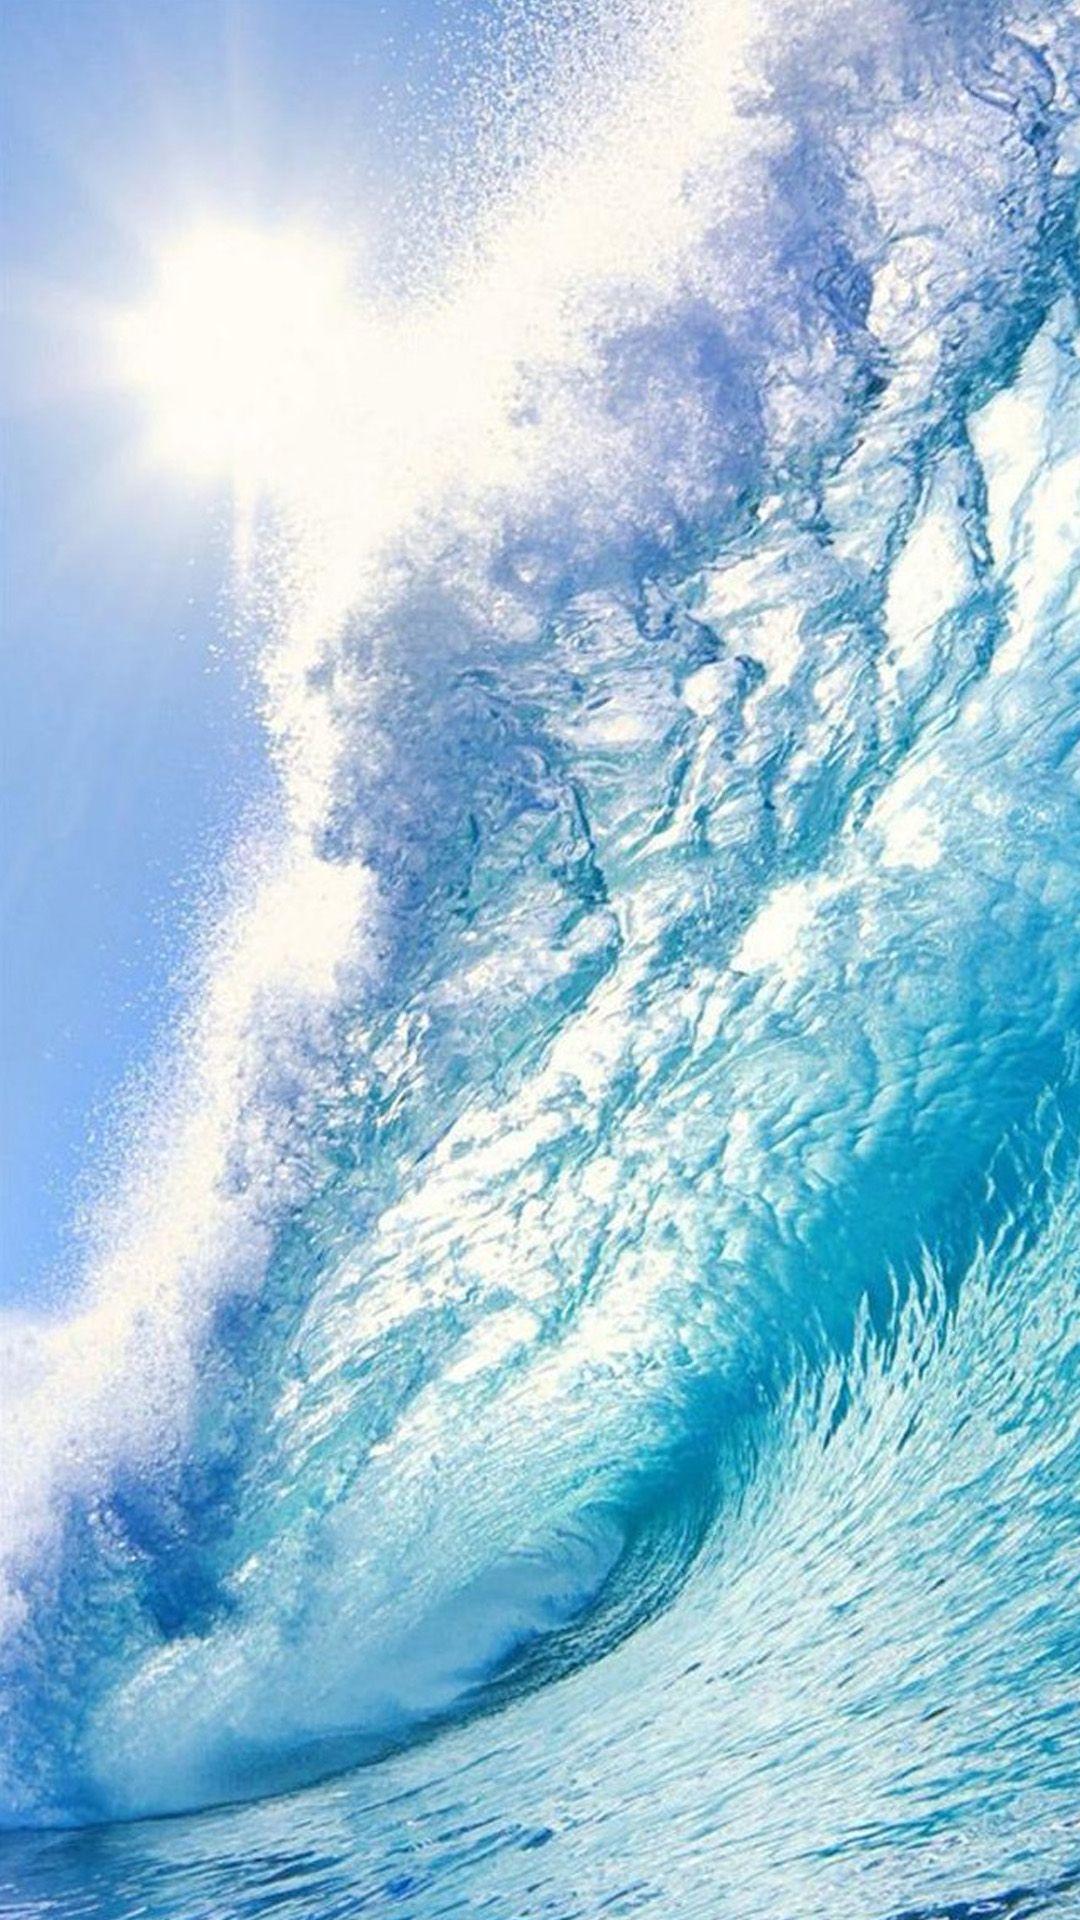 Big Wave Surfing IPhone Wallpaper Free Big Wave Surfing IPhone Background